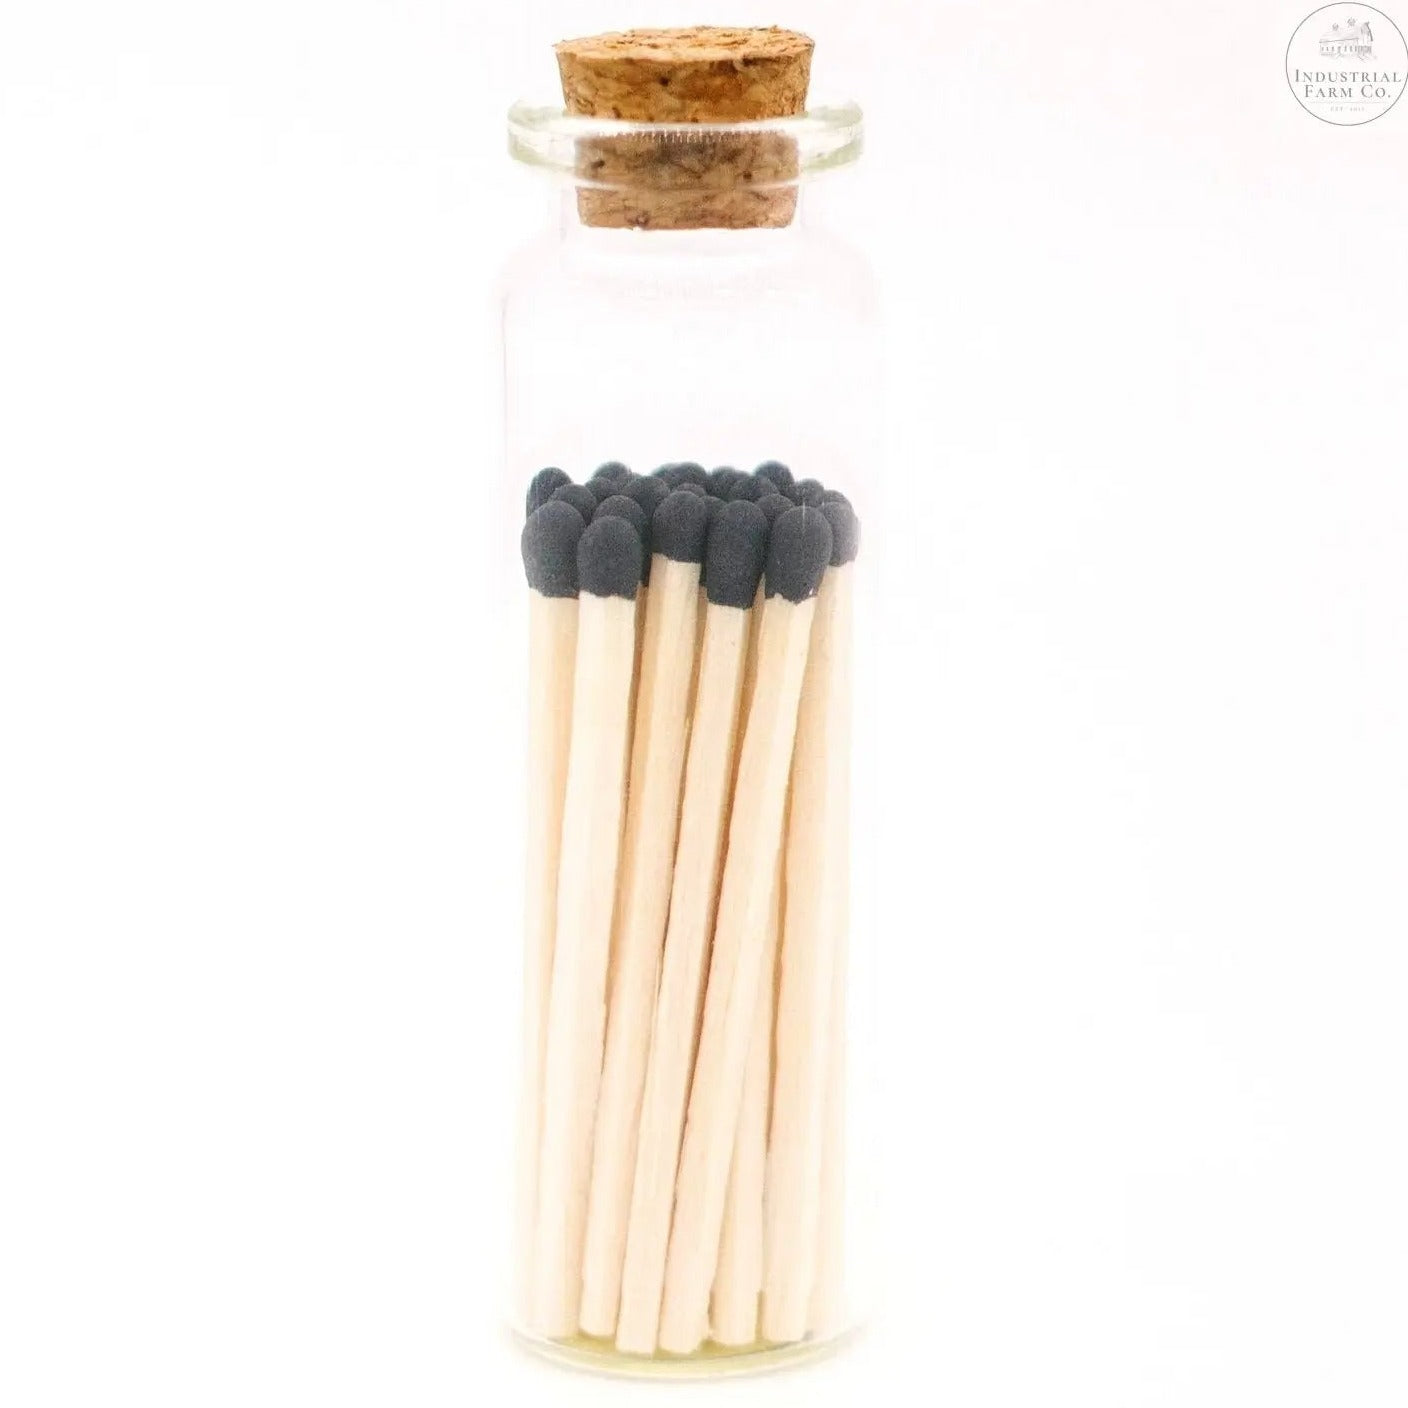 Decorative Mini Matches In Glass Container  Black Tip   | Industrial Farm Co